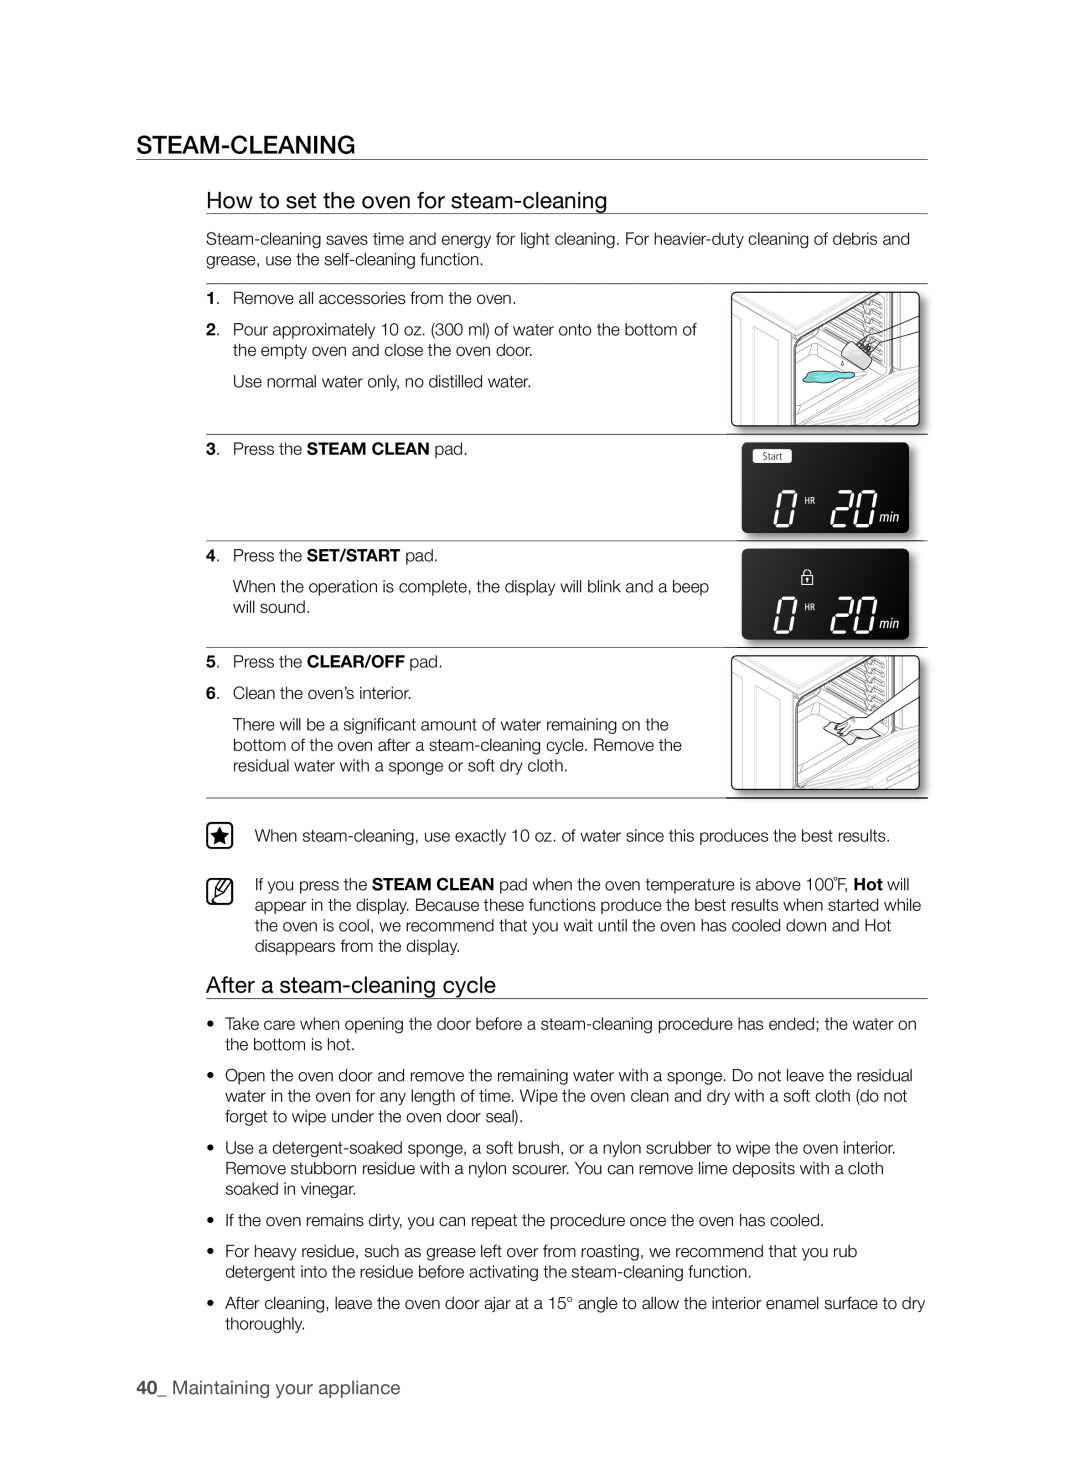 Samsung FTQ352IWW, FTQ352IWB user manual Steam-Cleaning, How to set the oven for steam-cleaning, After a steam-cleaningcycle 